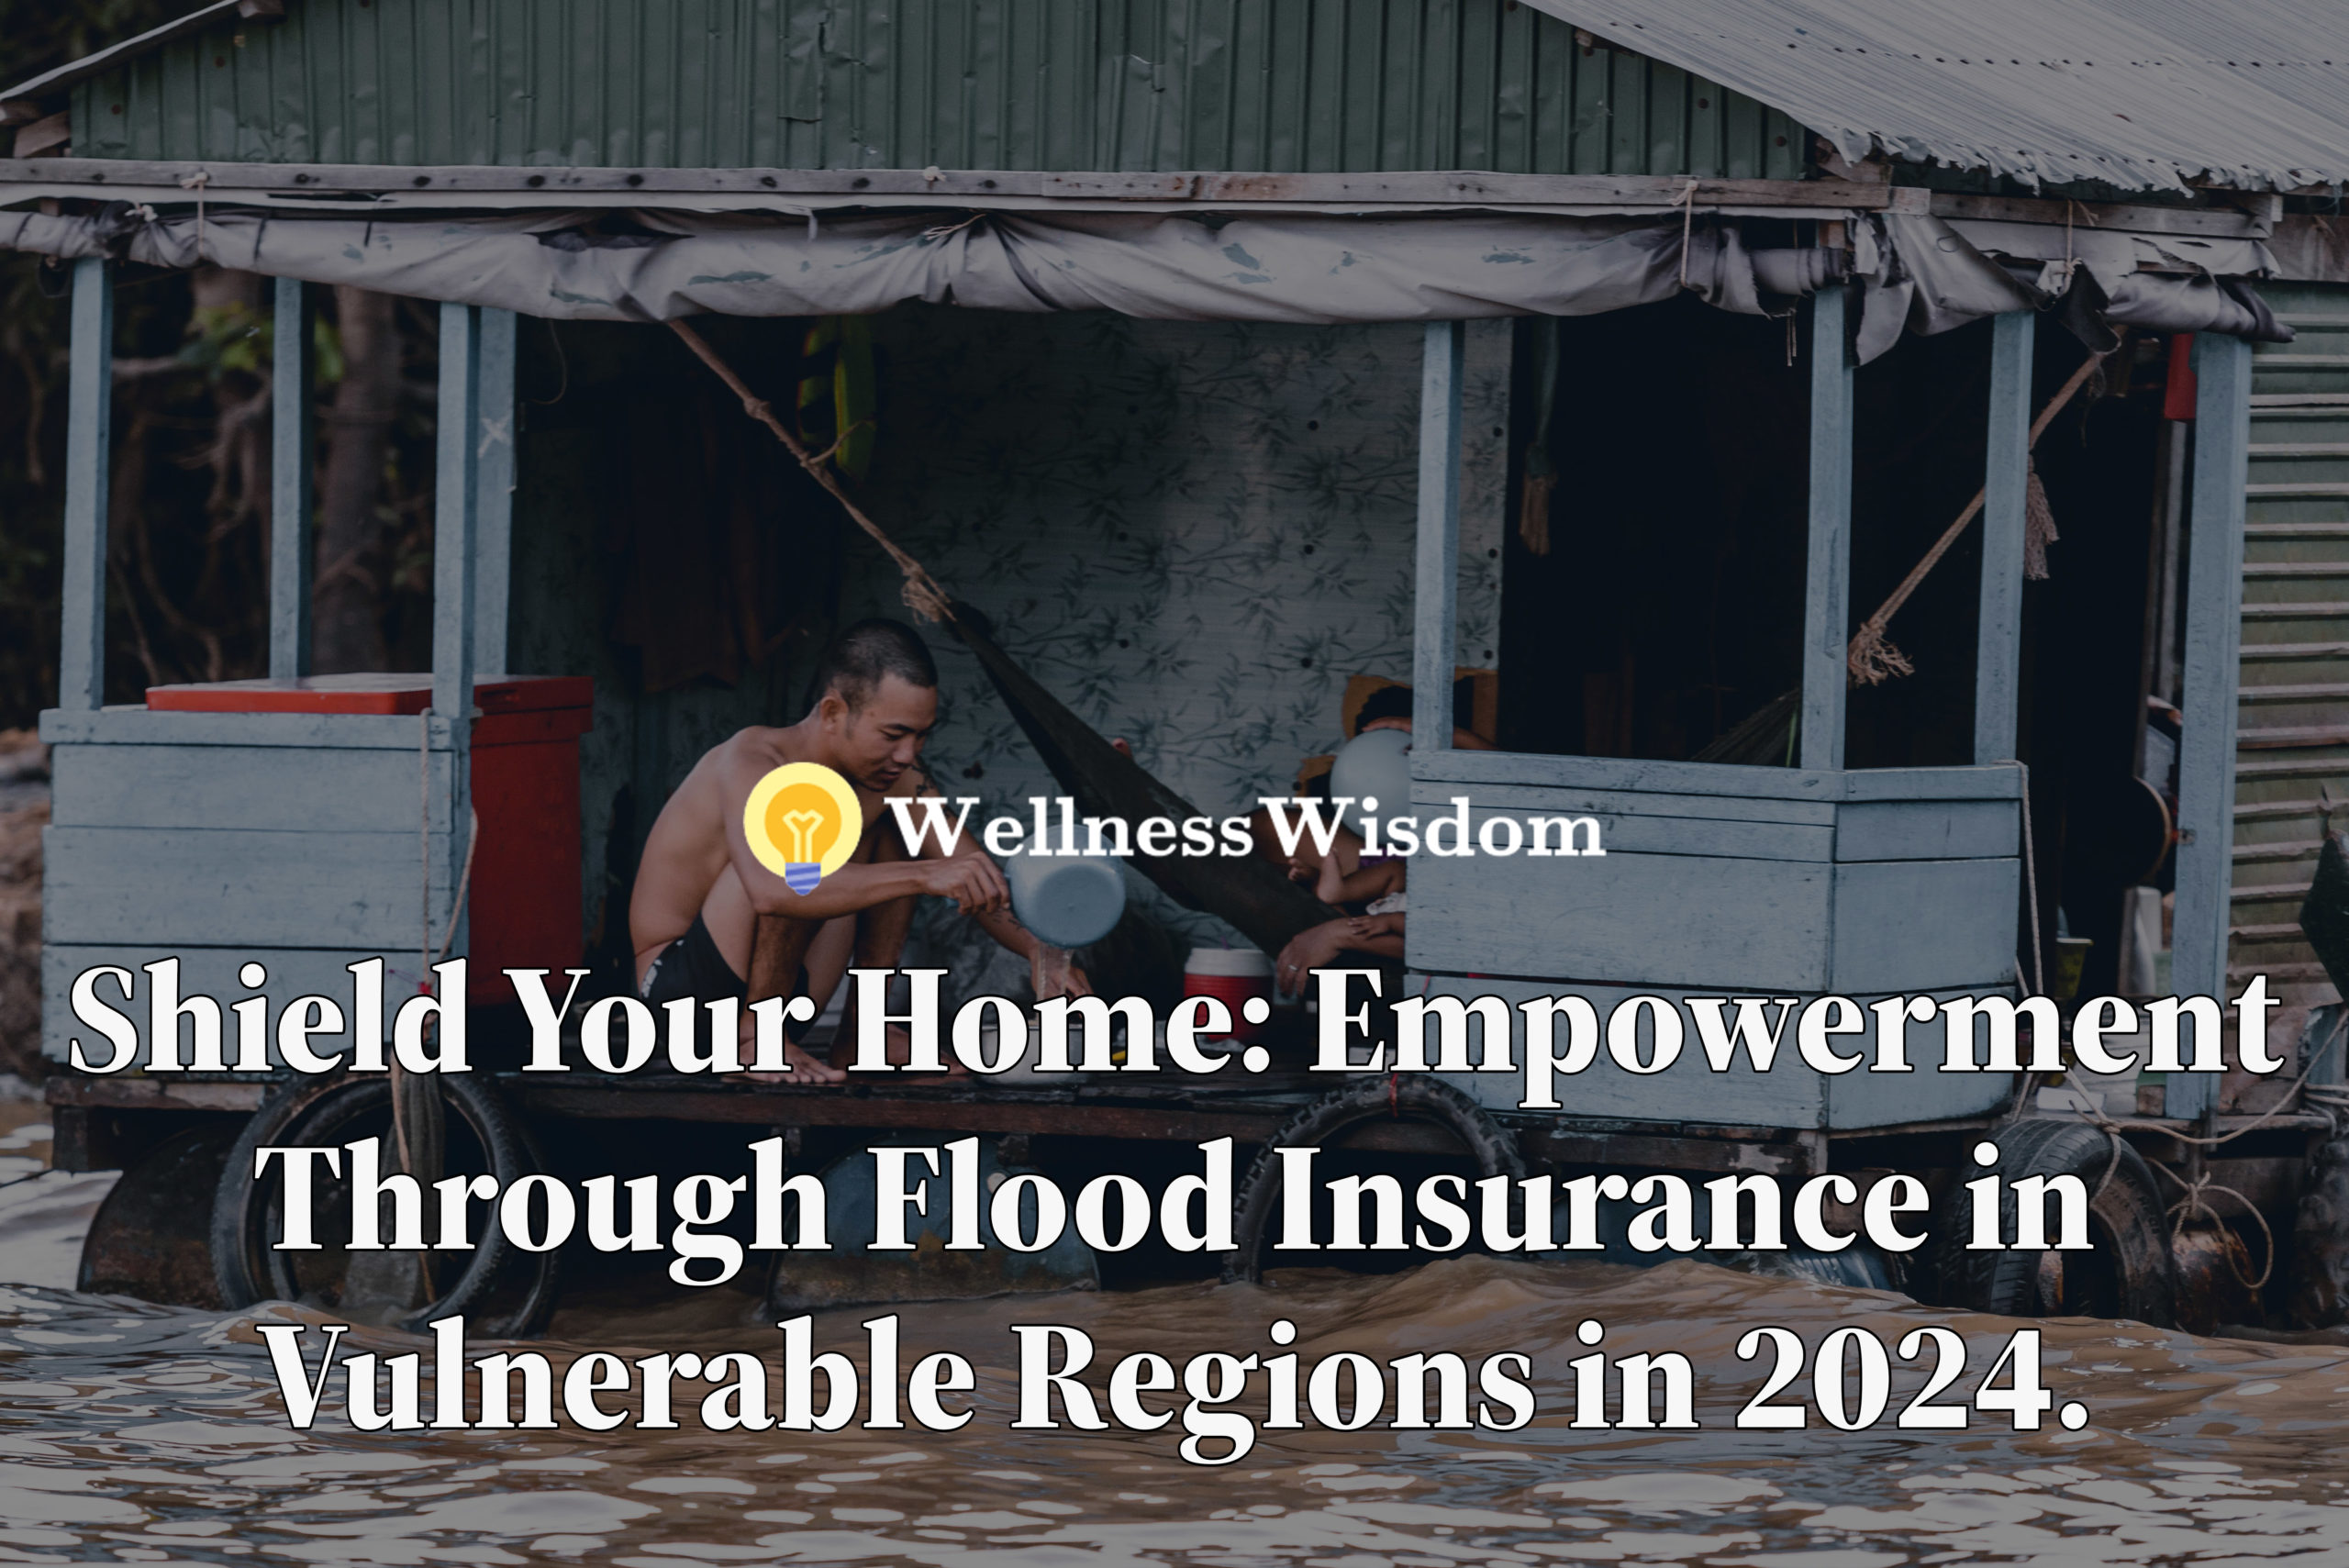 resilience, homeowners, home insurance, flood insurance, climate change, environmental risks, risk mitigation, disaster preparedness, community engagement, sustainable practices, emergency response, financial preparedness, property protection, insurance coverage, proactive measures